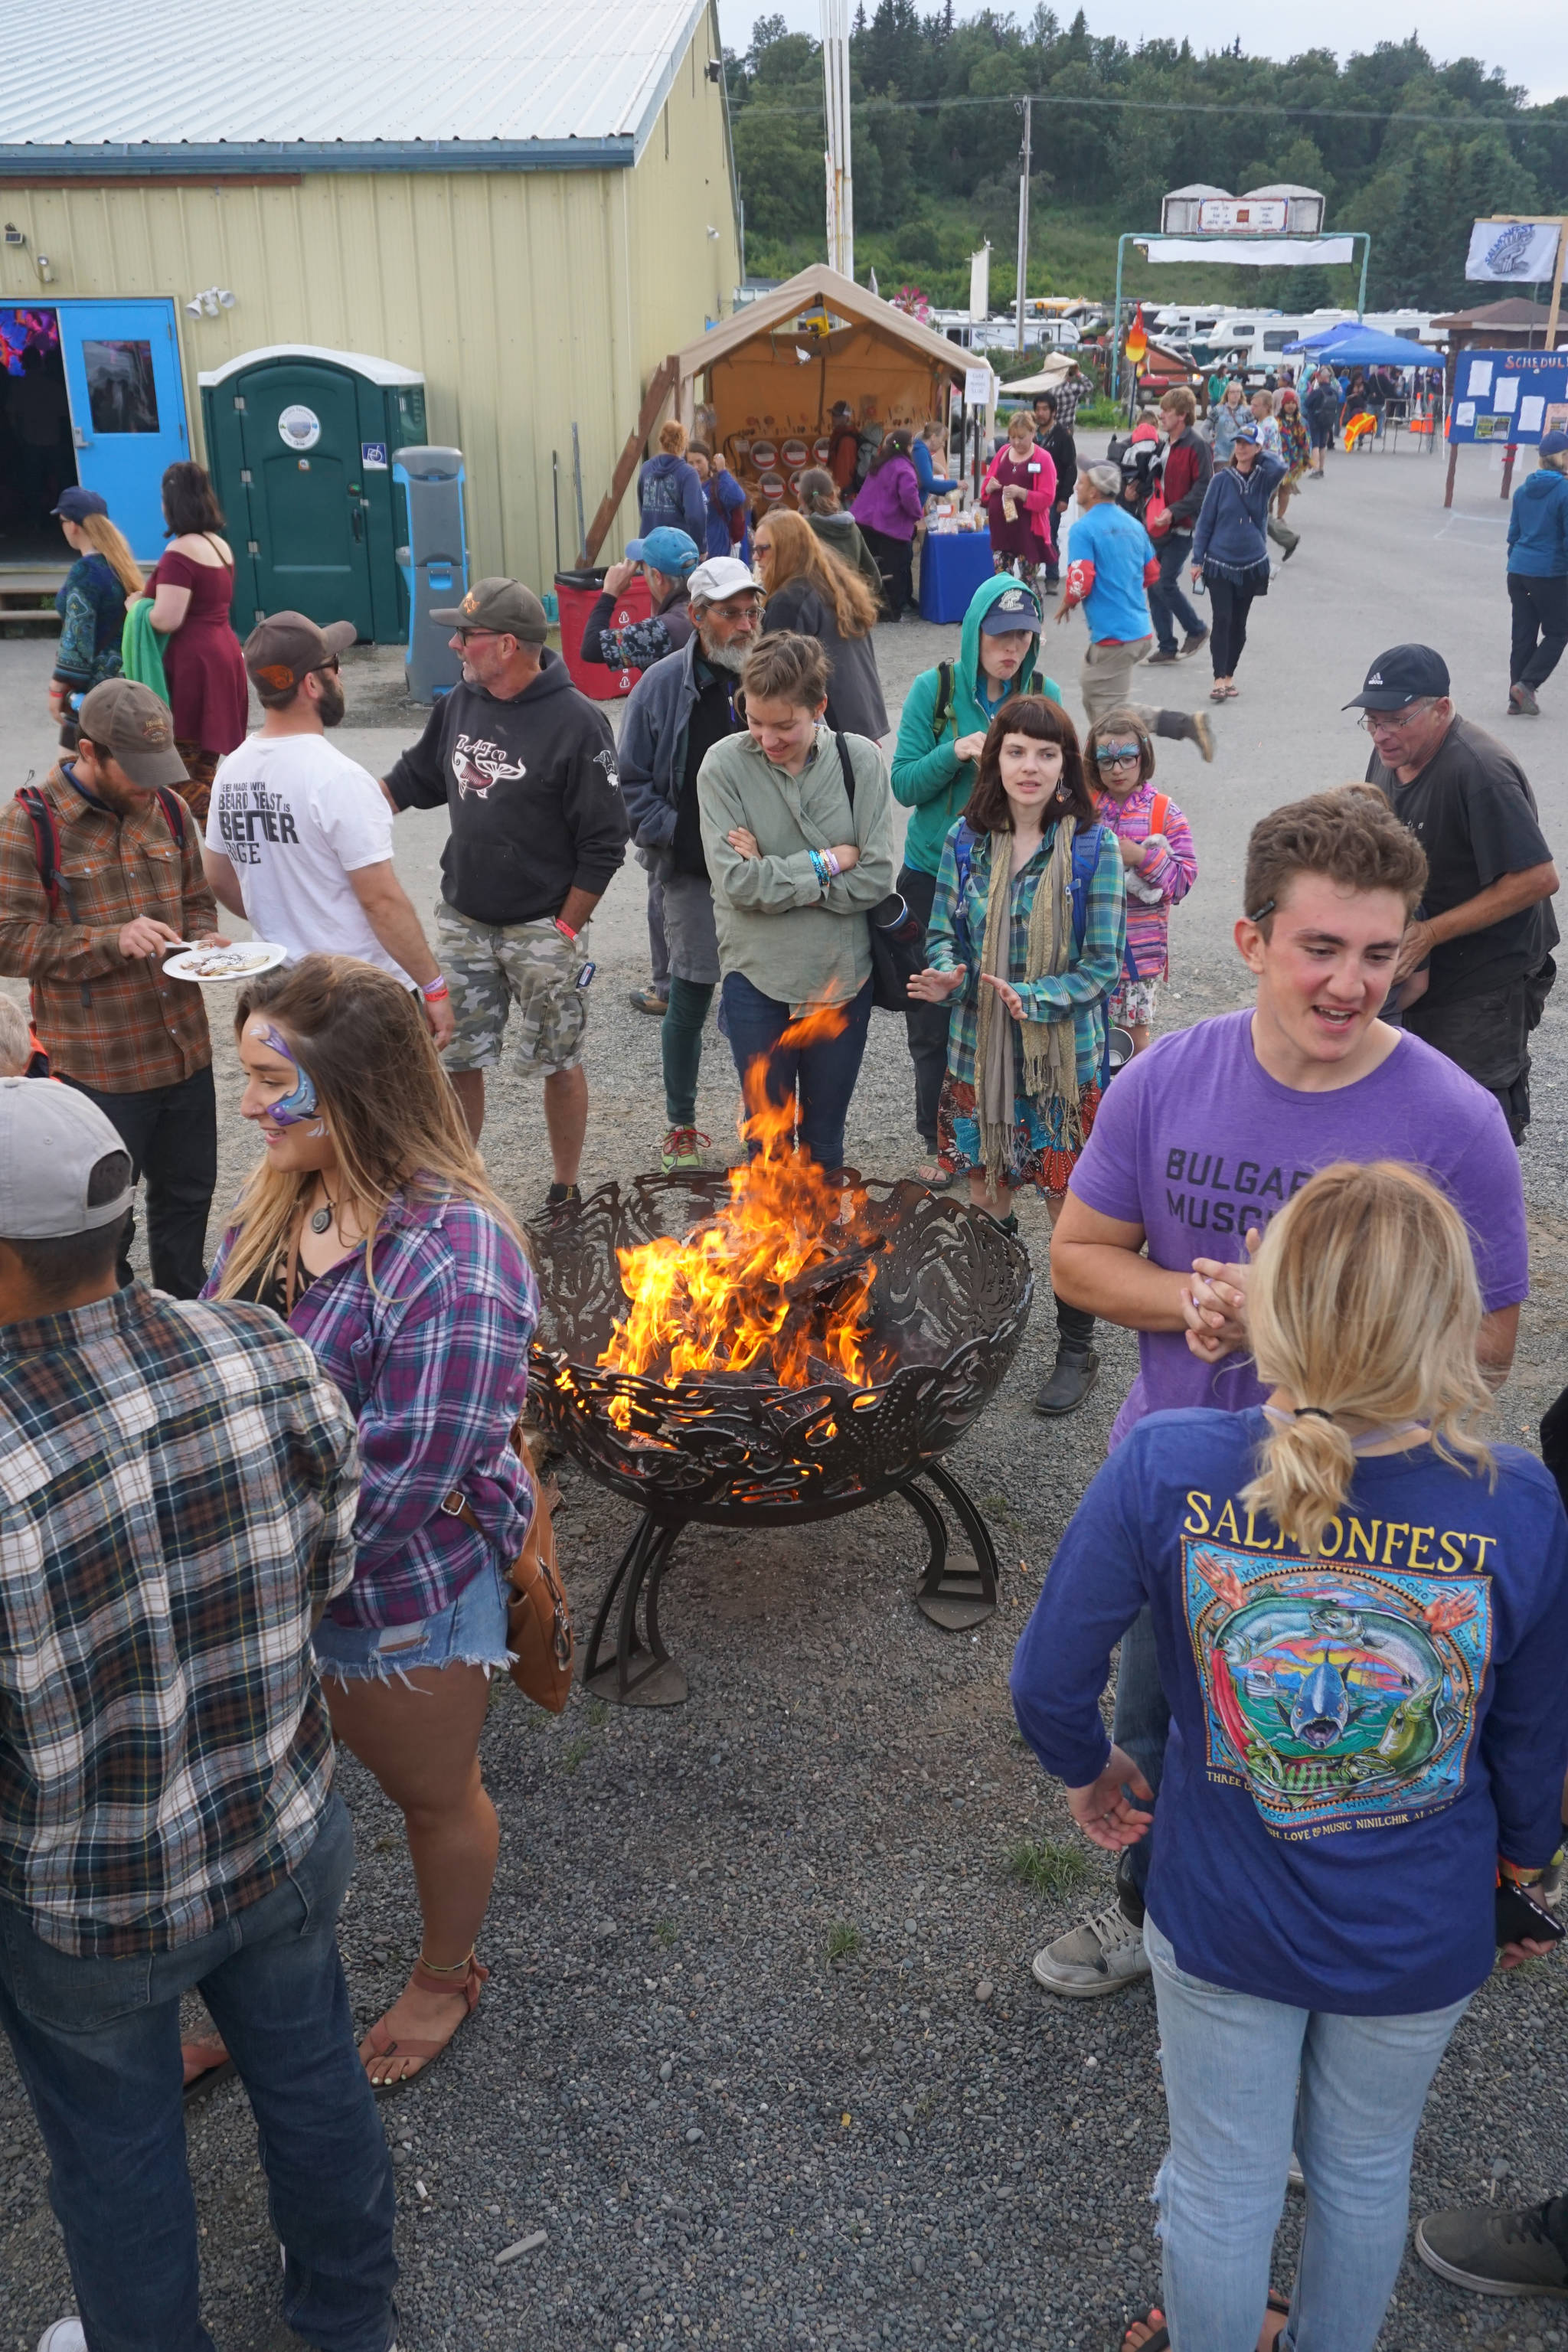 People stand around a fire pit on Saturday night, Aug. 5, 2017, at Salmonfest, Ninilchik, Alaska. (Photo by Michael Armstrong, Homer News)